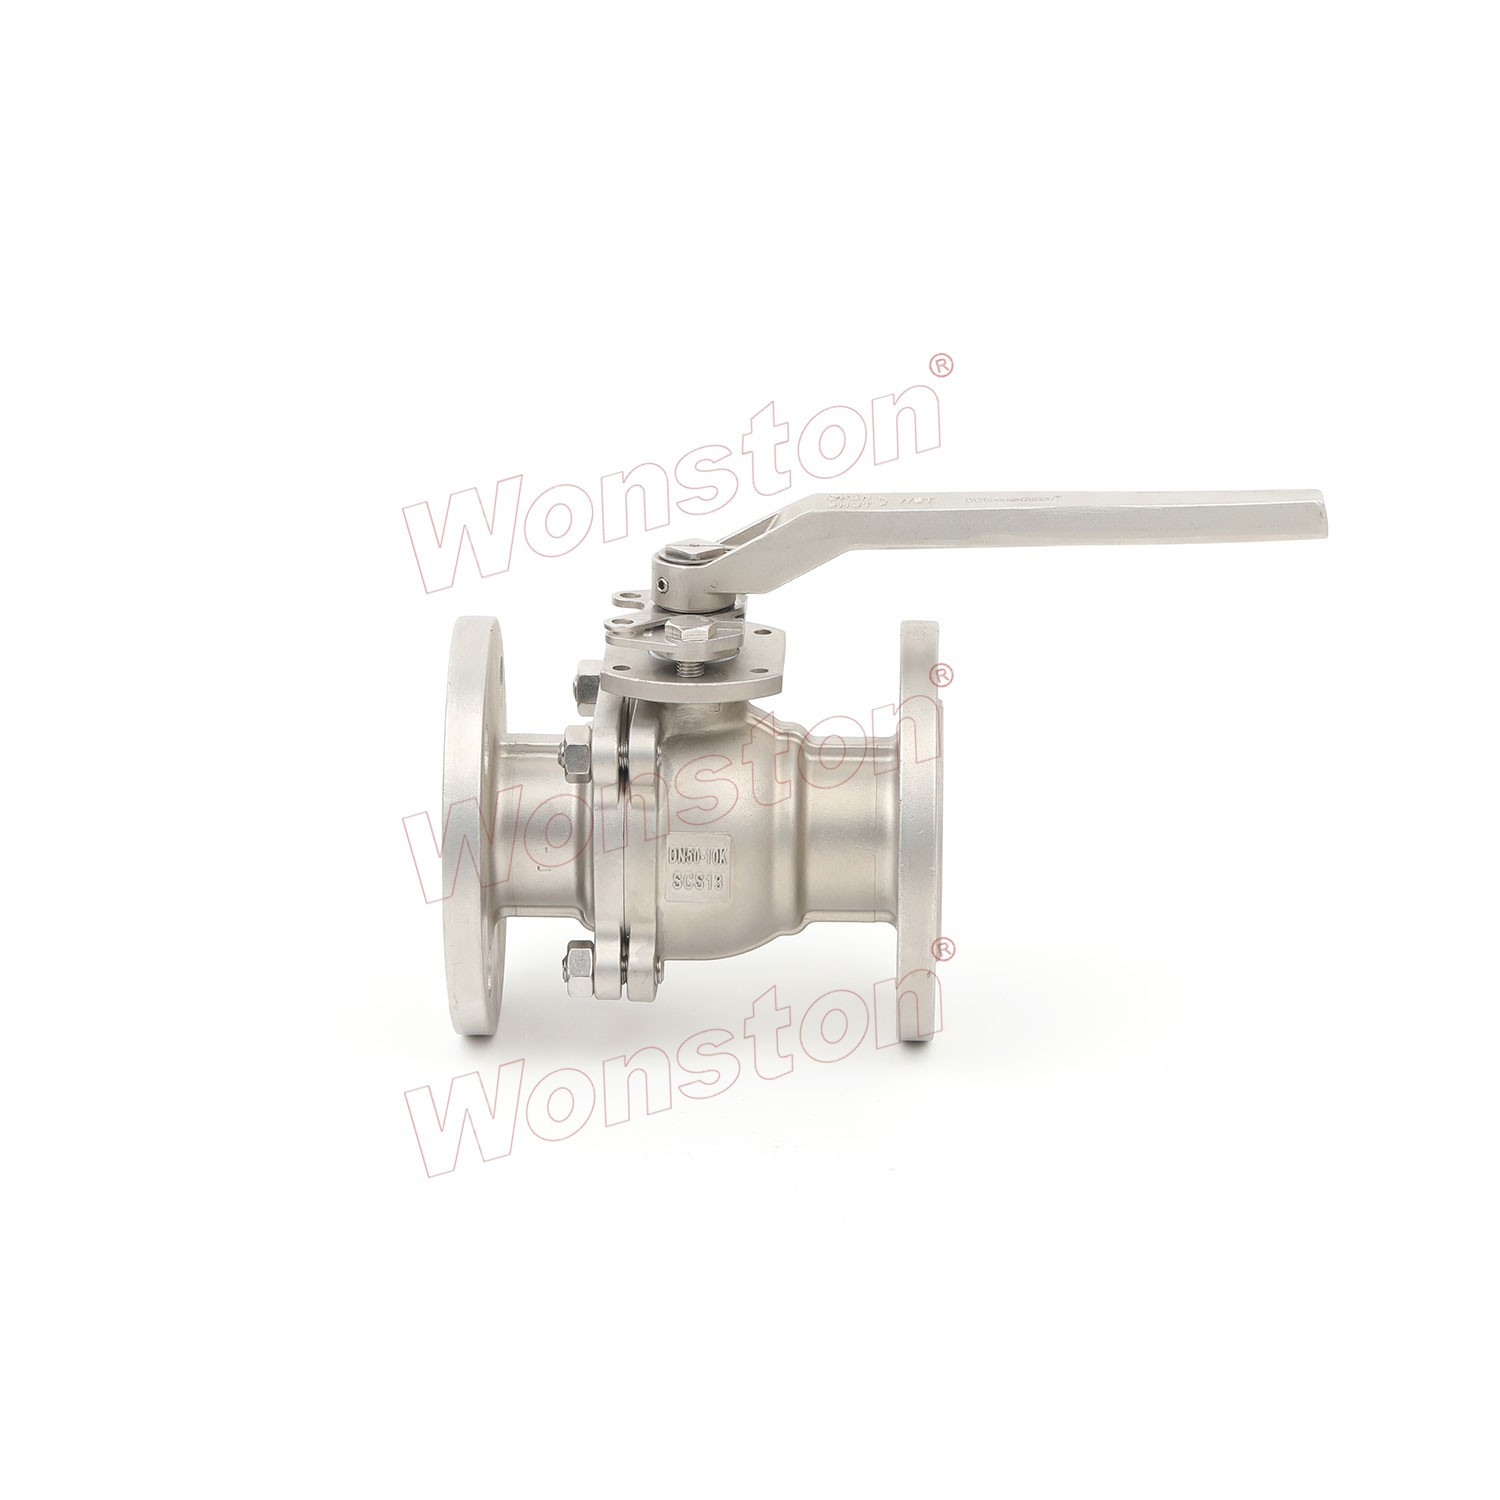 2PC Ball Valve Flanged End With Mounting Pad JIS10K